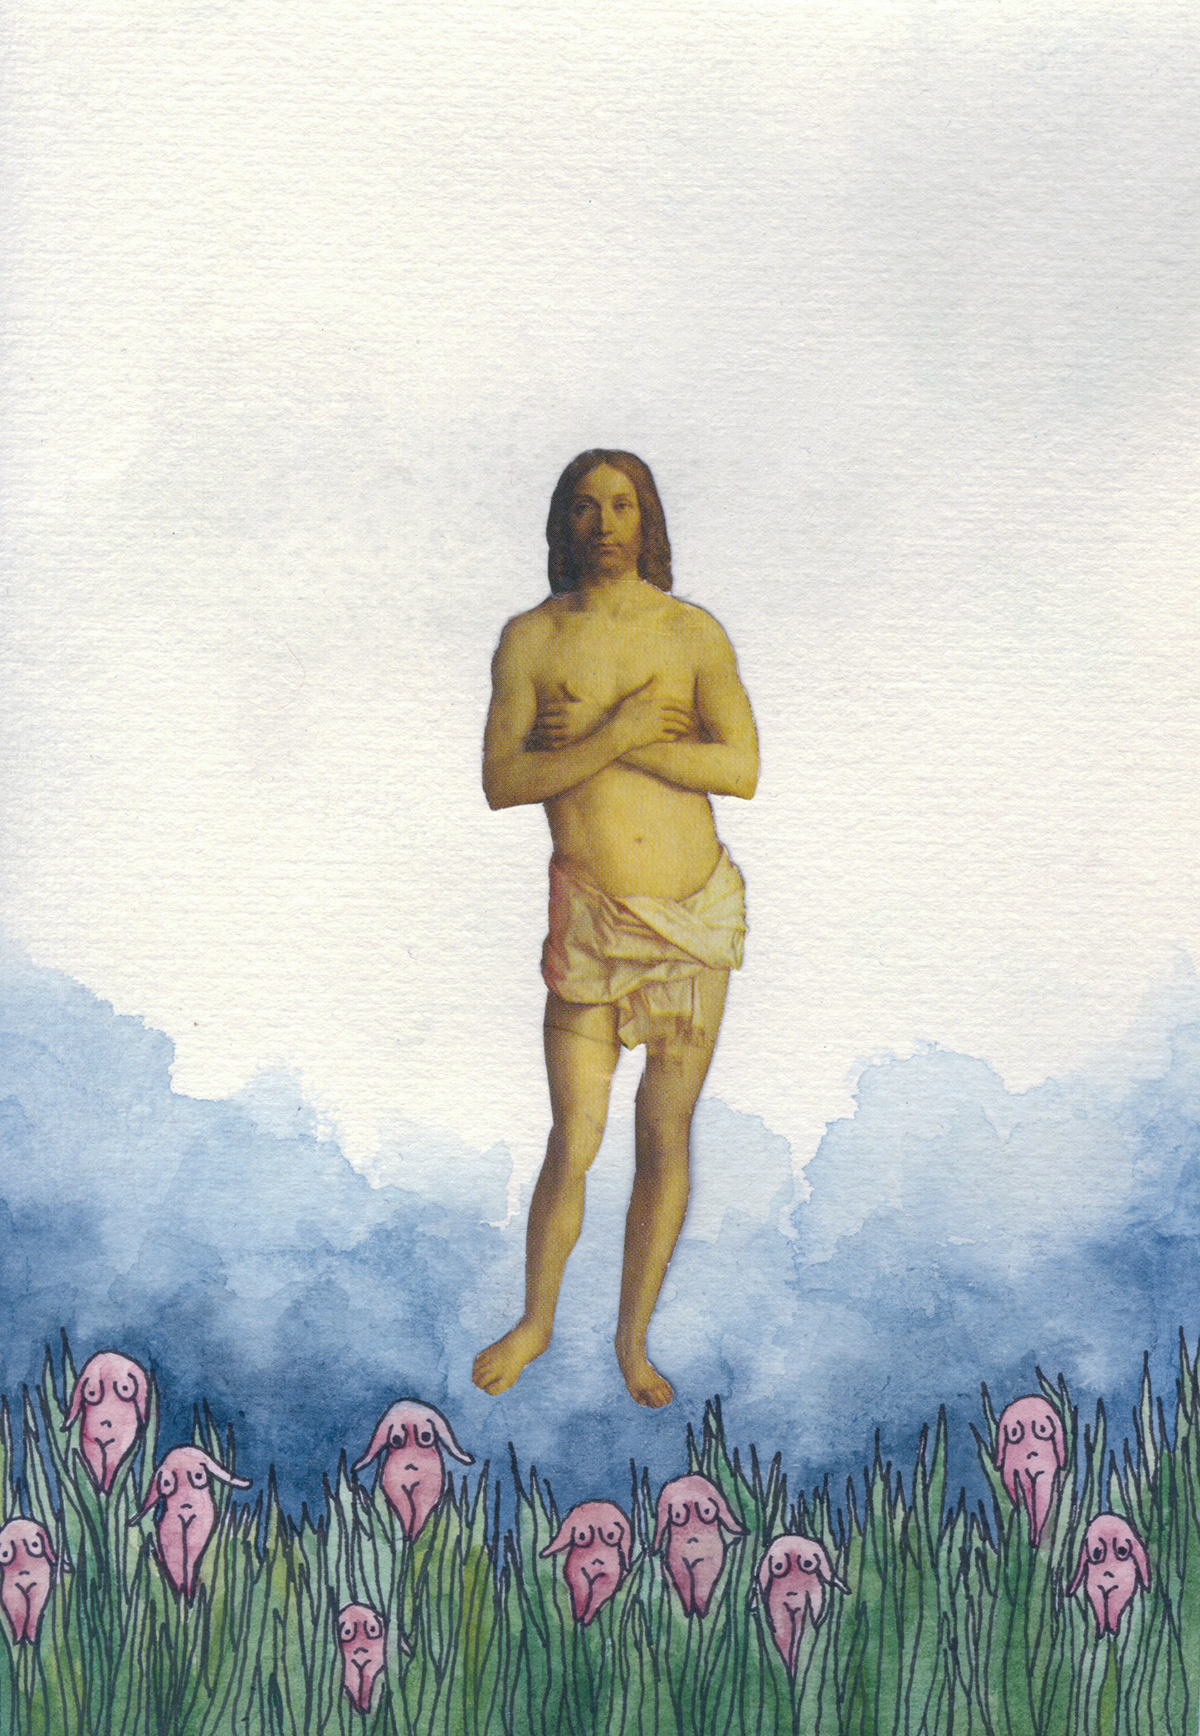 jesus female watercolors collage nudes Triptych biblical bible church Christian religious religion